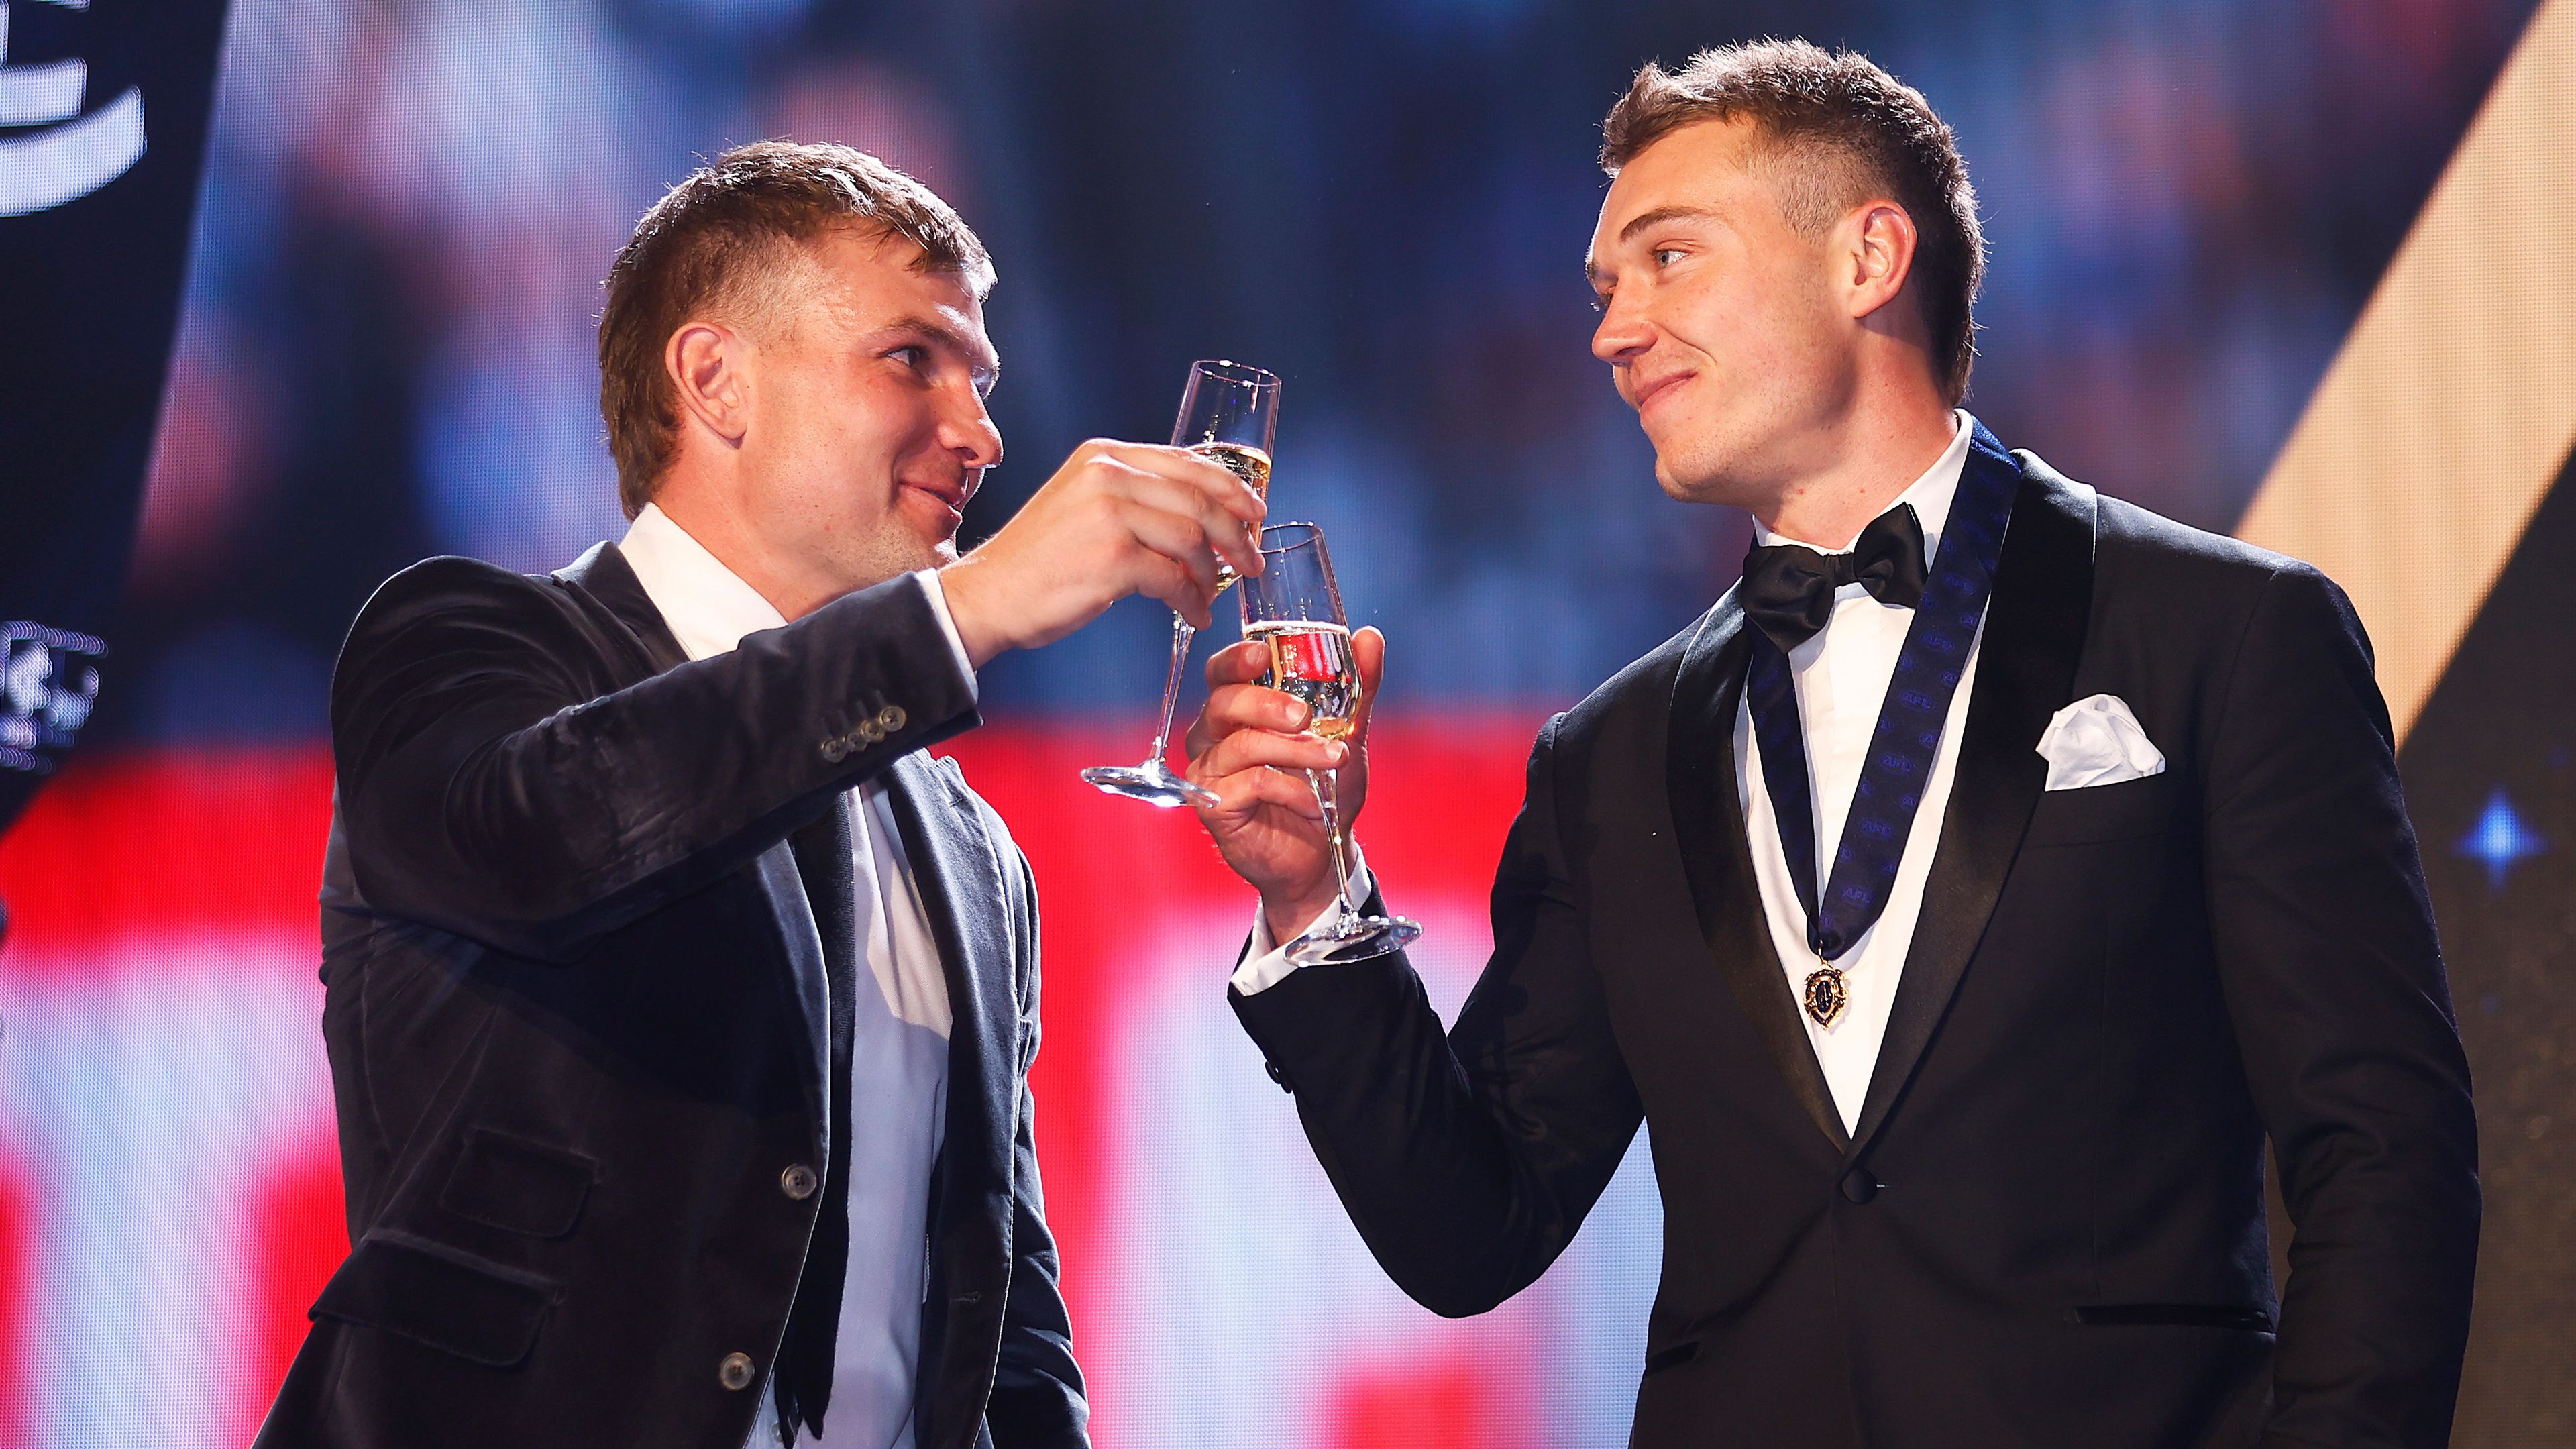 Patrick Cripps of the Blues (R) is congratulated by Ollie Wines of the Power after winning the Brownlow Medal during the 2022 Brownlow Medal at Crown Entertainment Complex on September 18, 2022 in Melbourne, Australia. (Photo by Daniel Pockett/AFL Photos/via Getty Images)